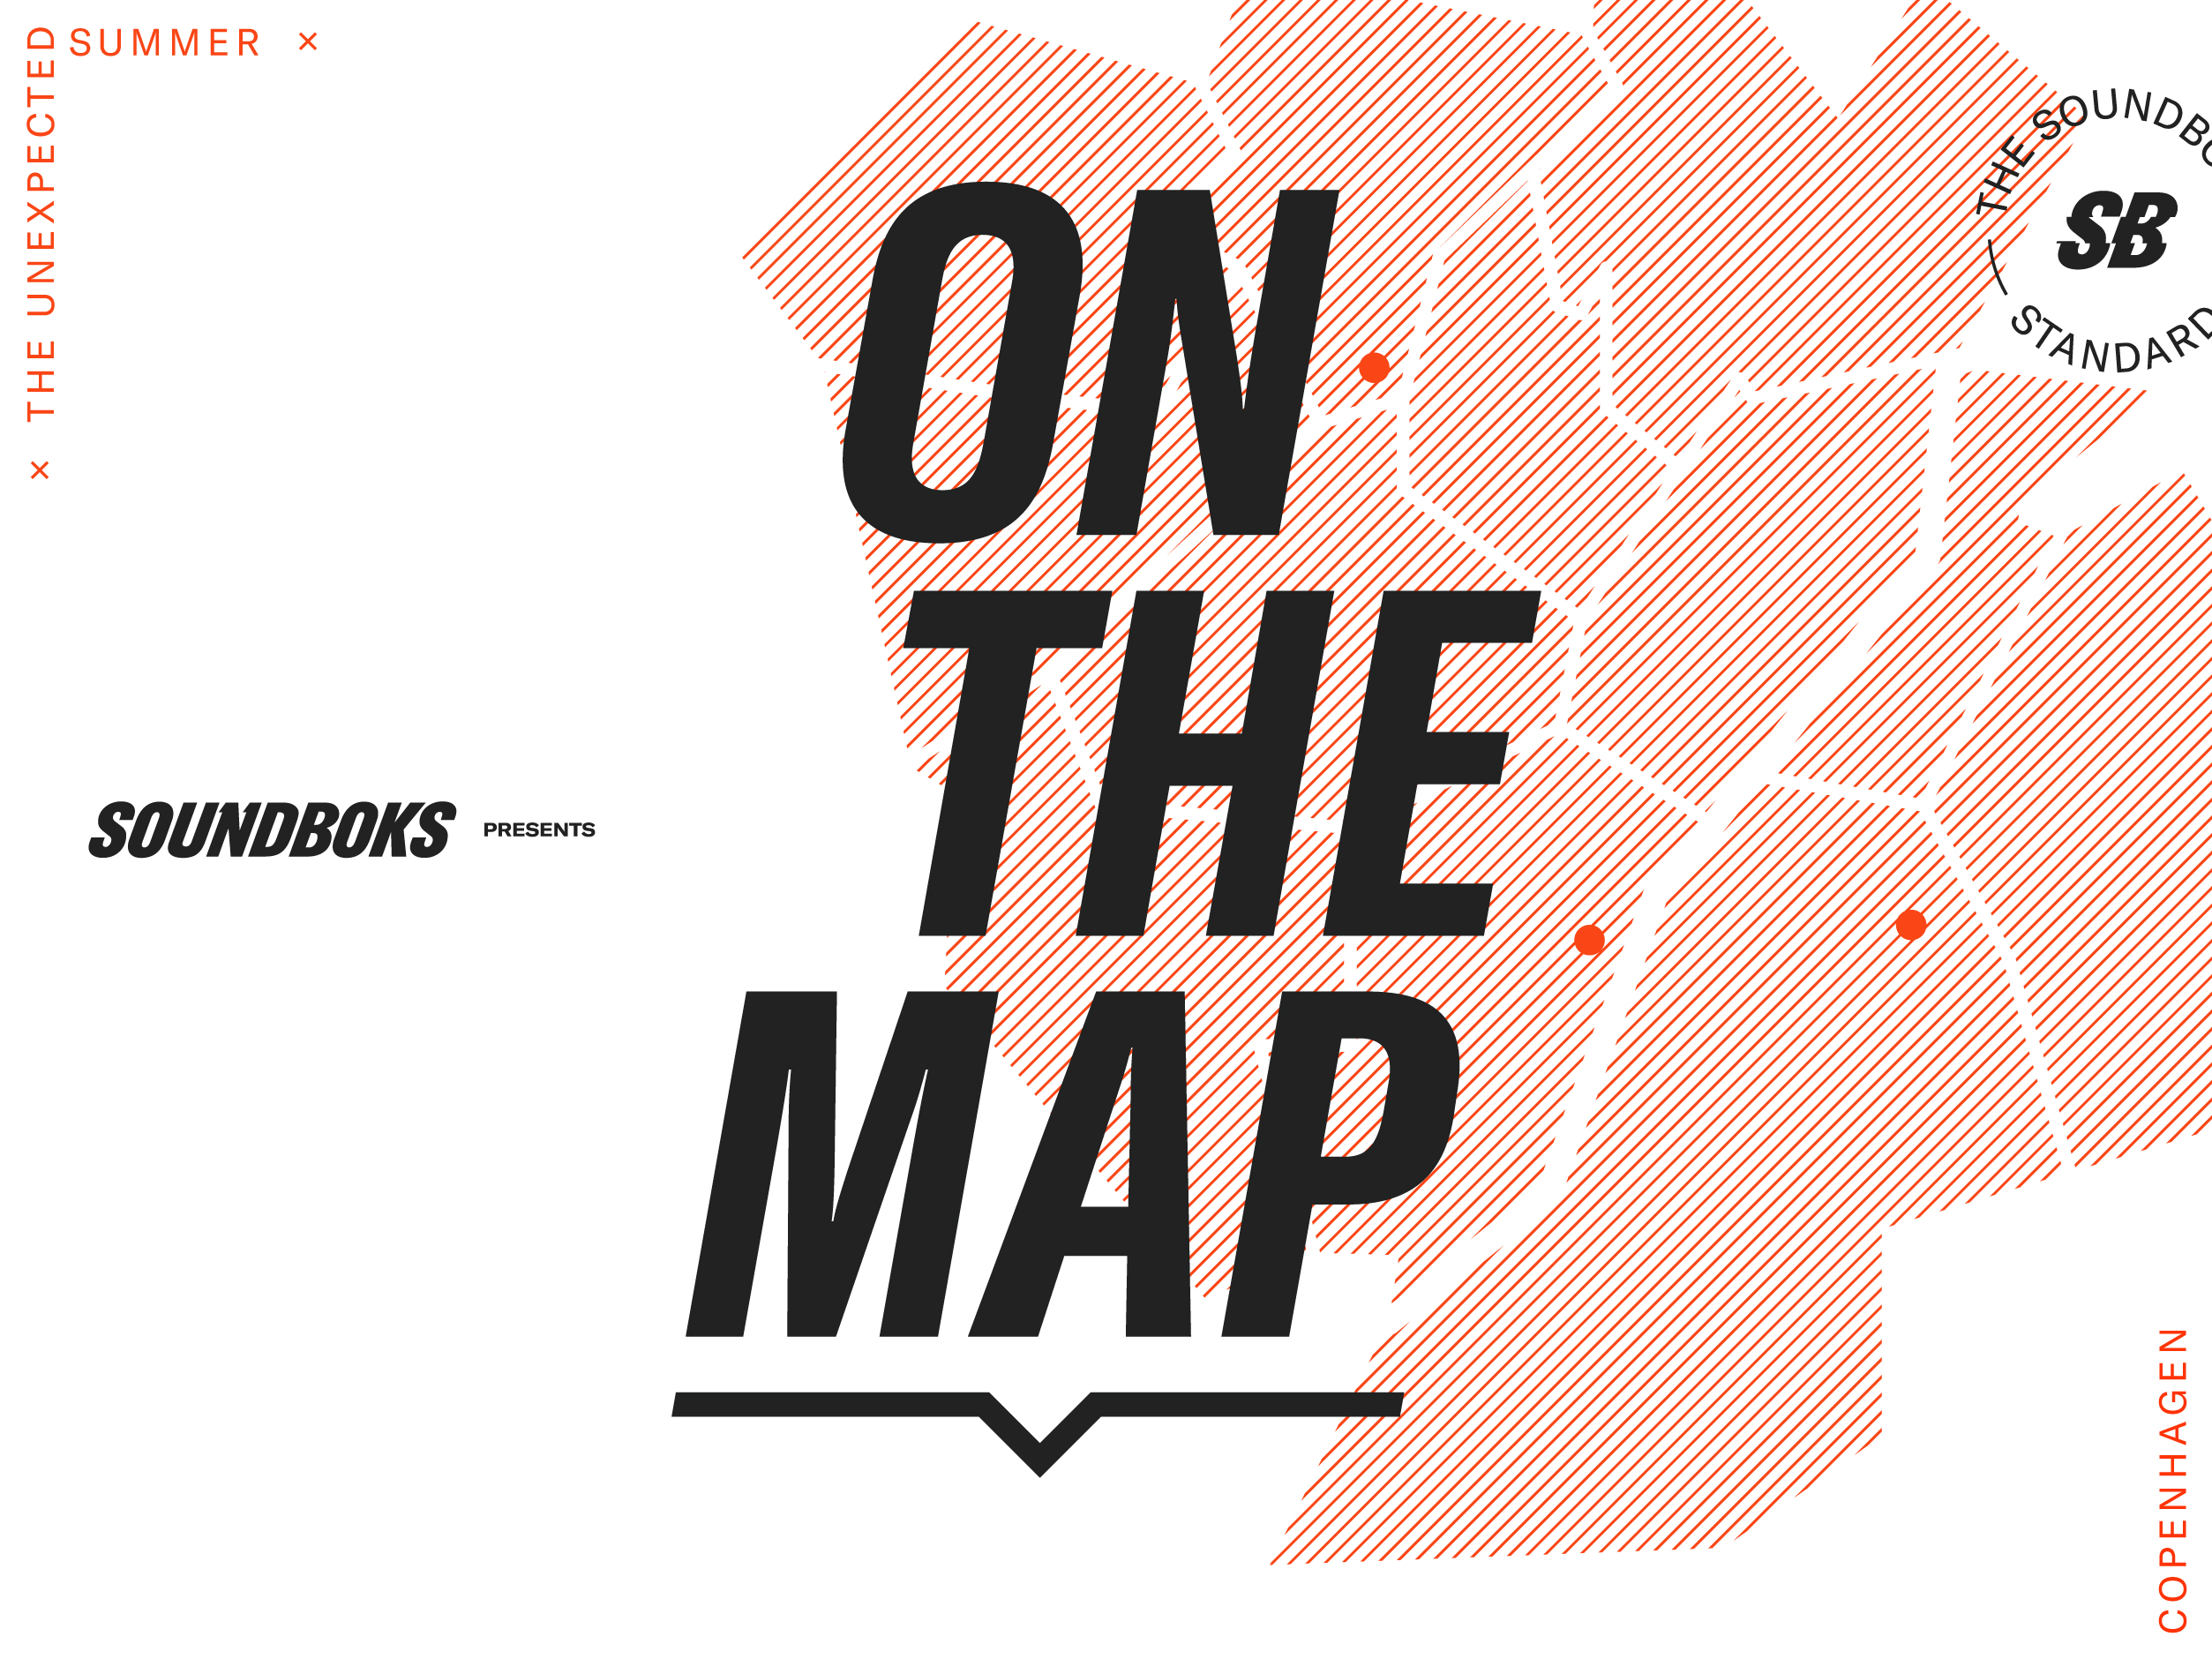 Summer Events 2021 hosted by Soundboks in Copenhagen, Berlin, Hamburg and Stuttgart. ‘On The Map’ is about connecting city hotspots and people through music.